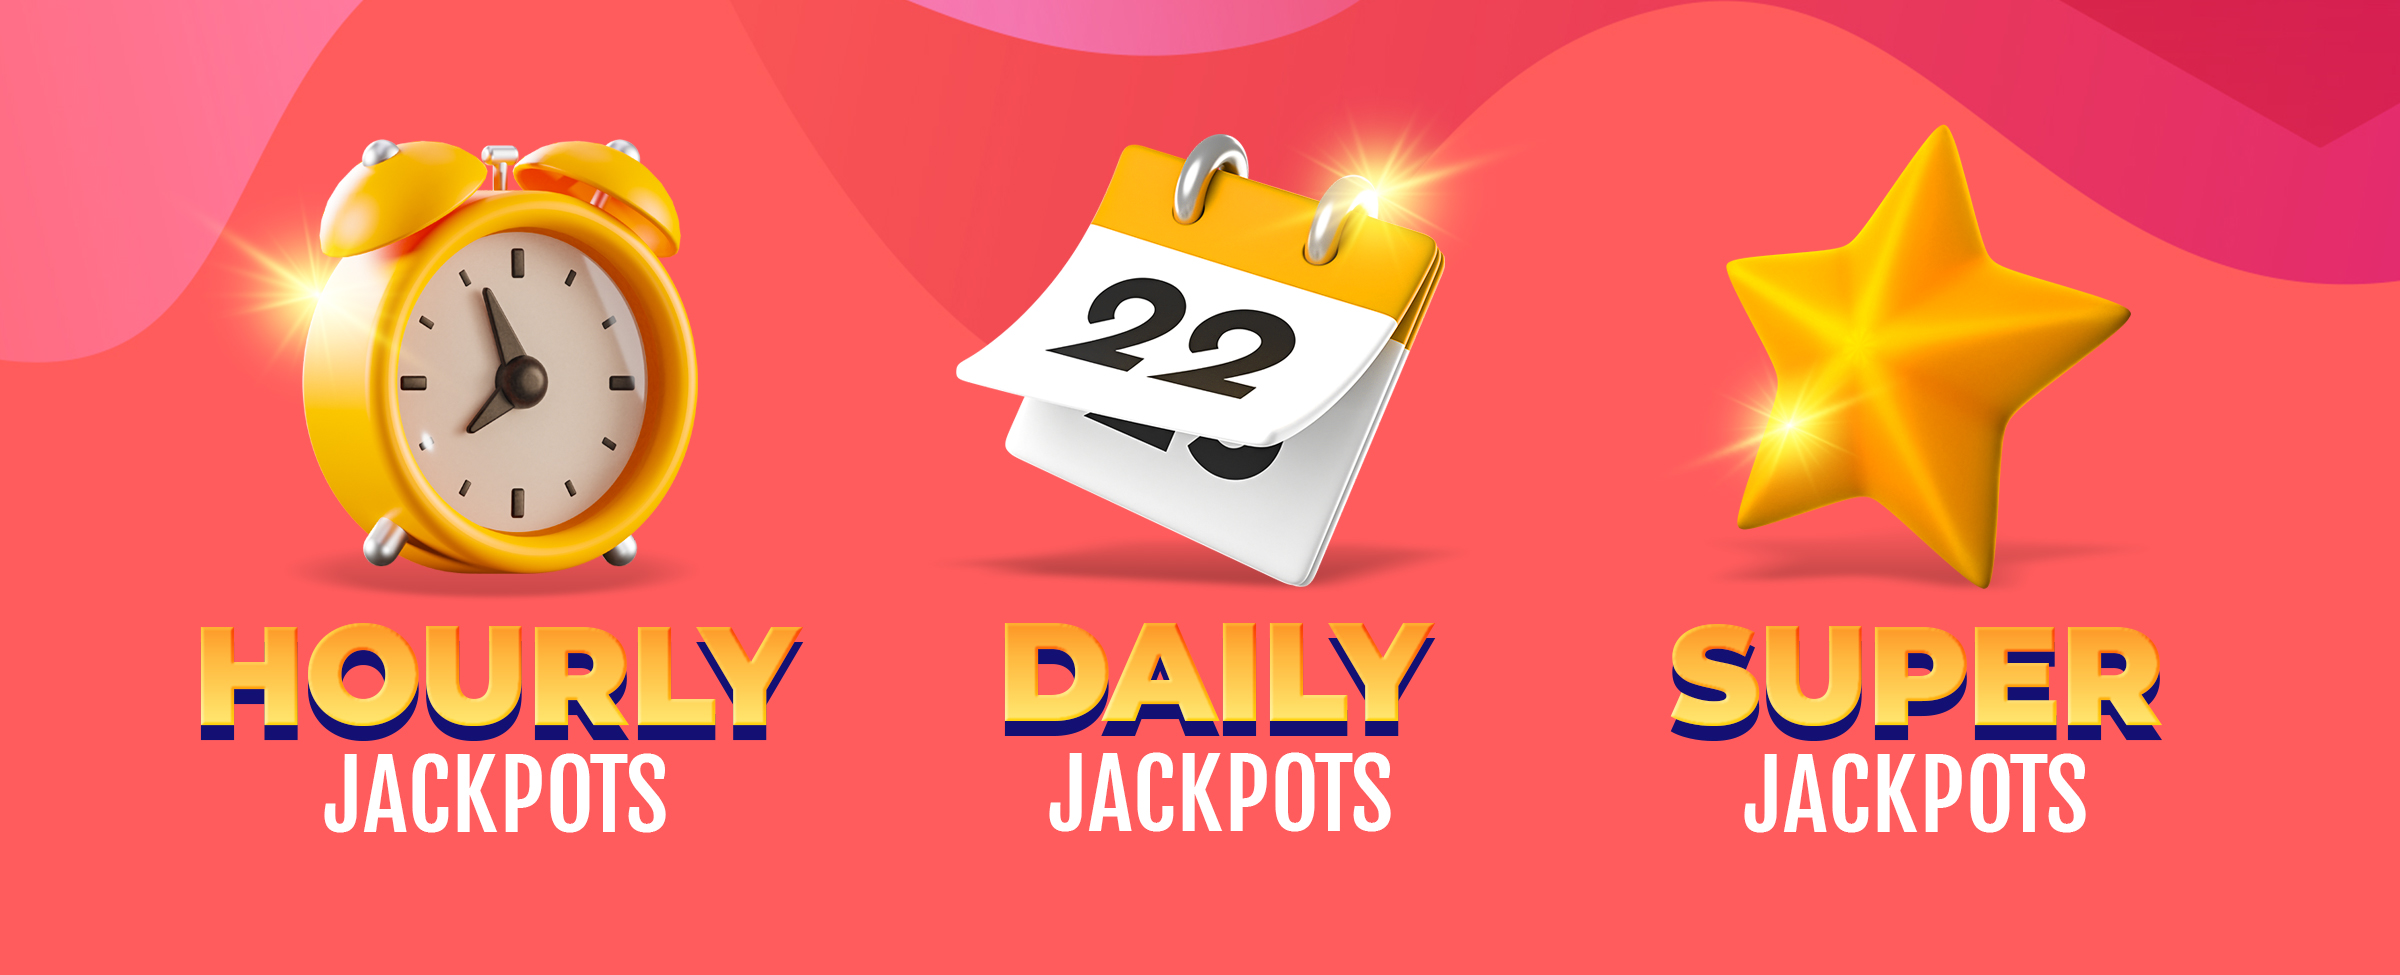 Speaking of Hot Drop Jackpots, we take a look at the three types of jackpots you could win when you play Reels of Fortune at SlotsLV.